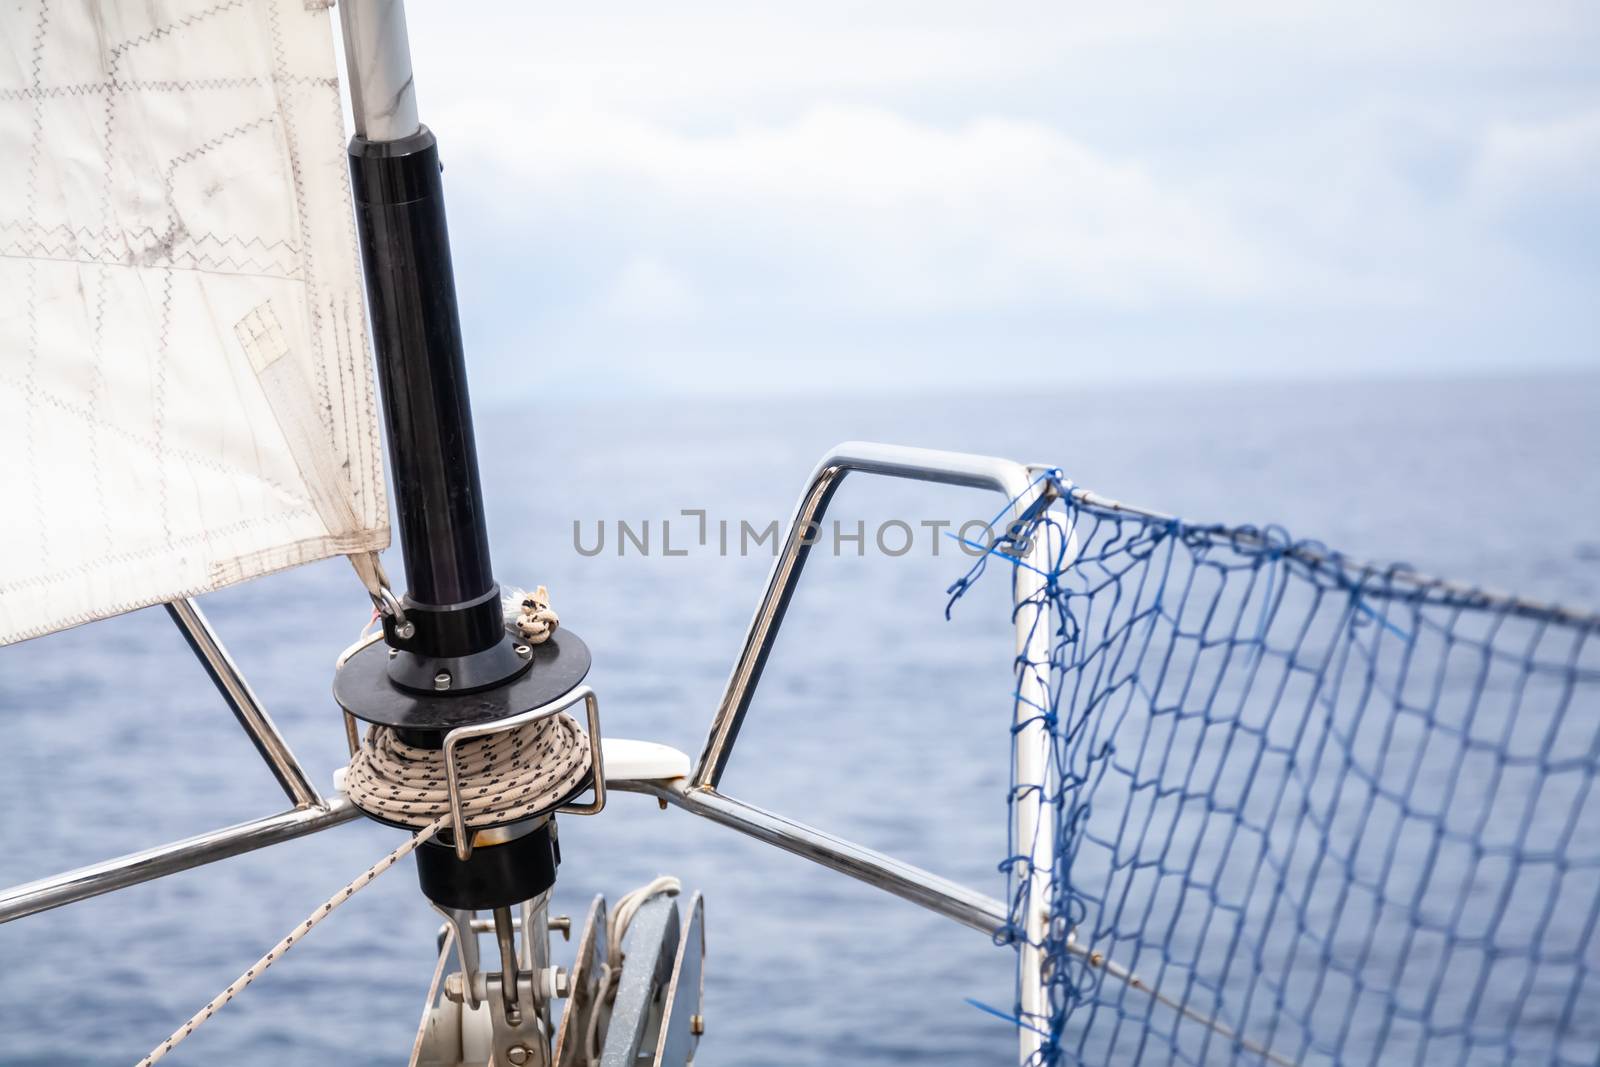 An image of a Sailing boat front background